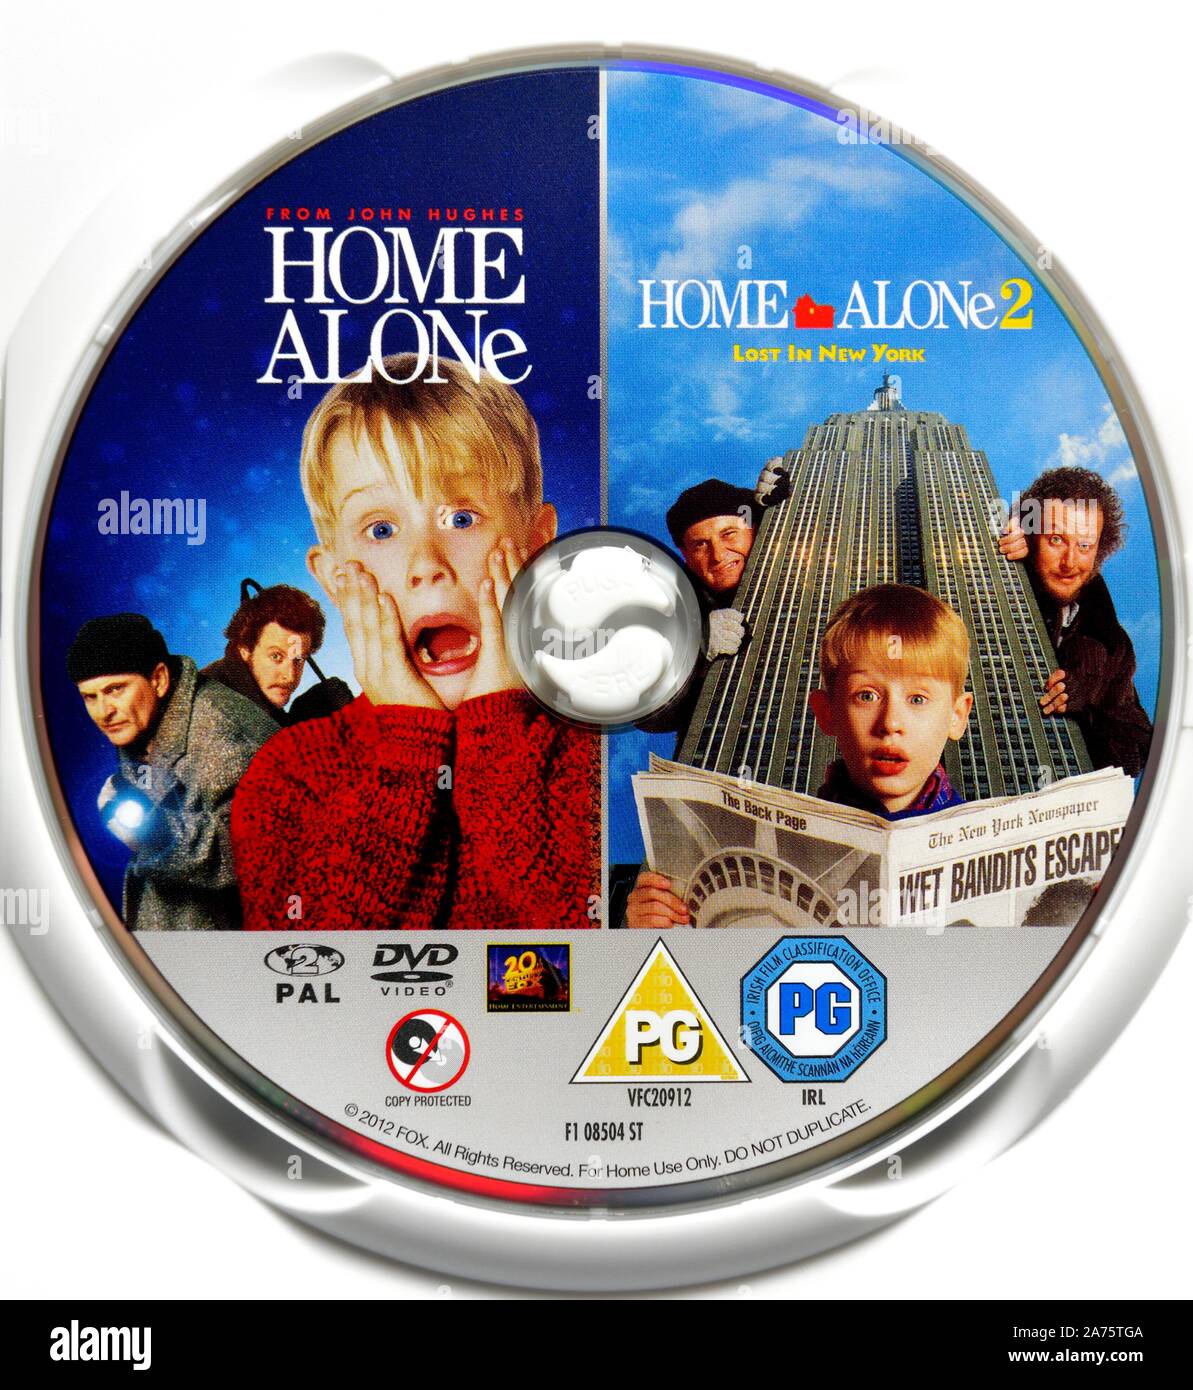 Home alone, and home alone 2 DVD Stock Photo